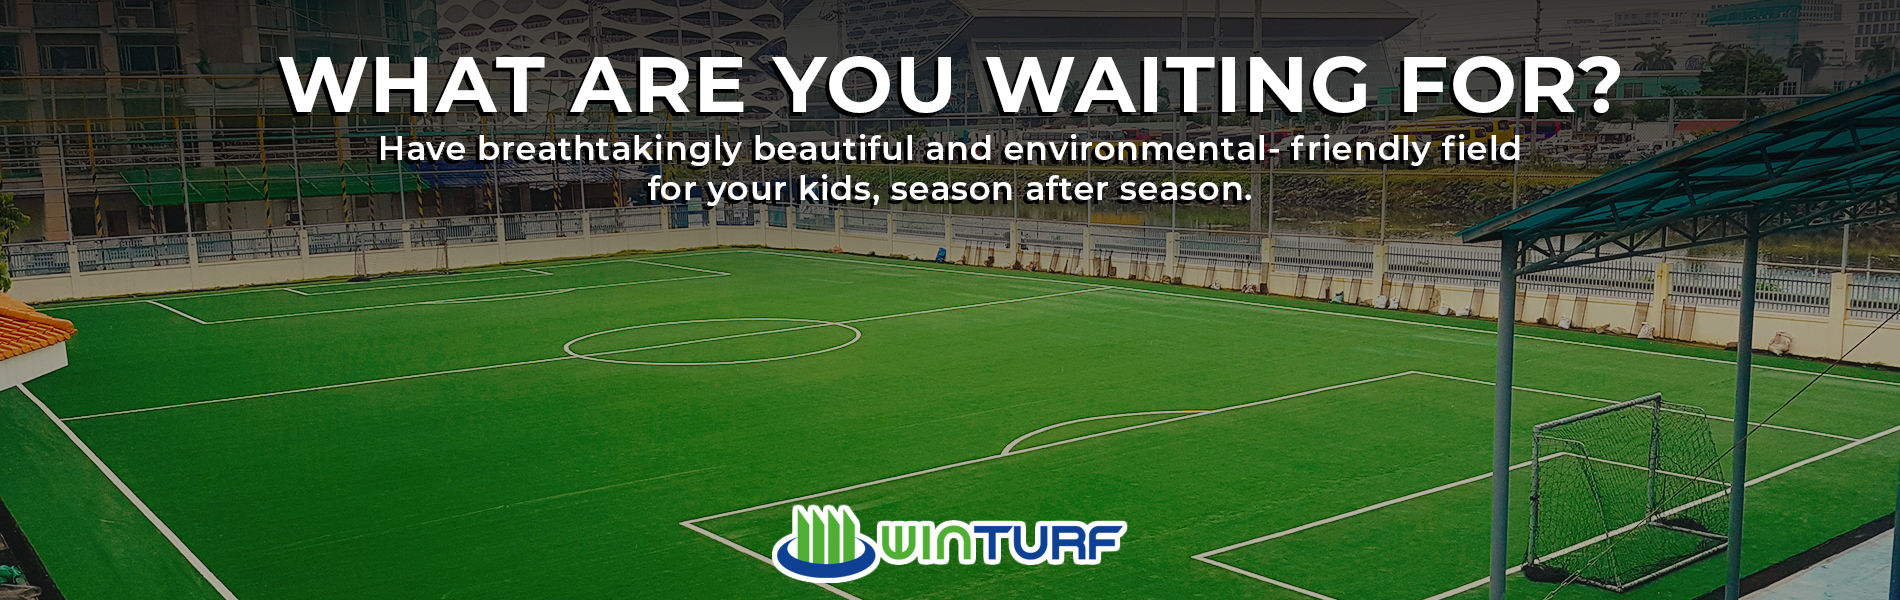 winturf-banner-1st-page